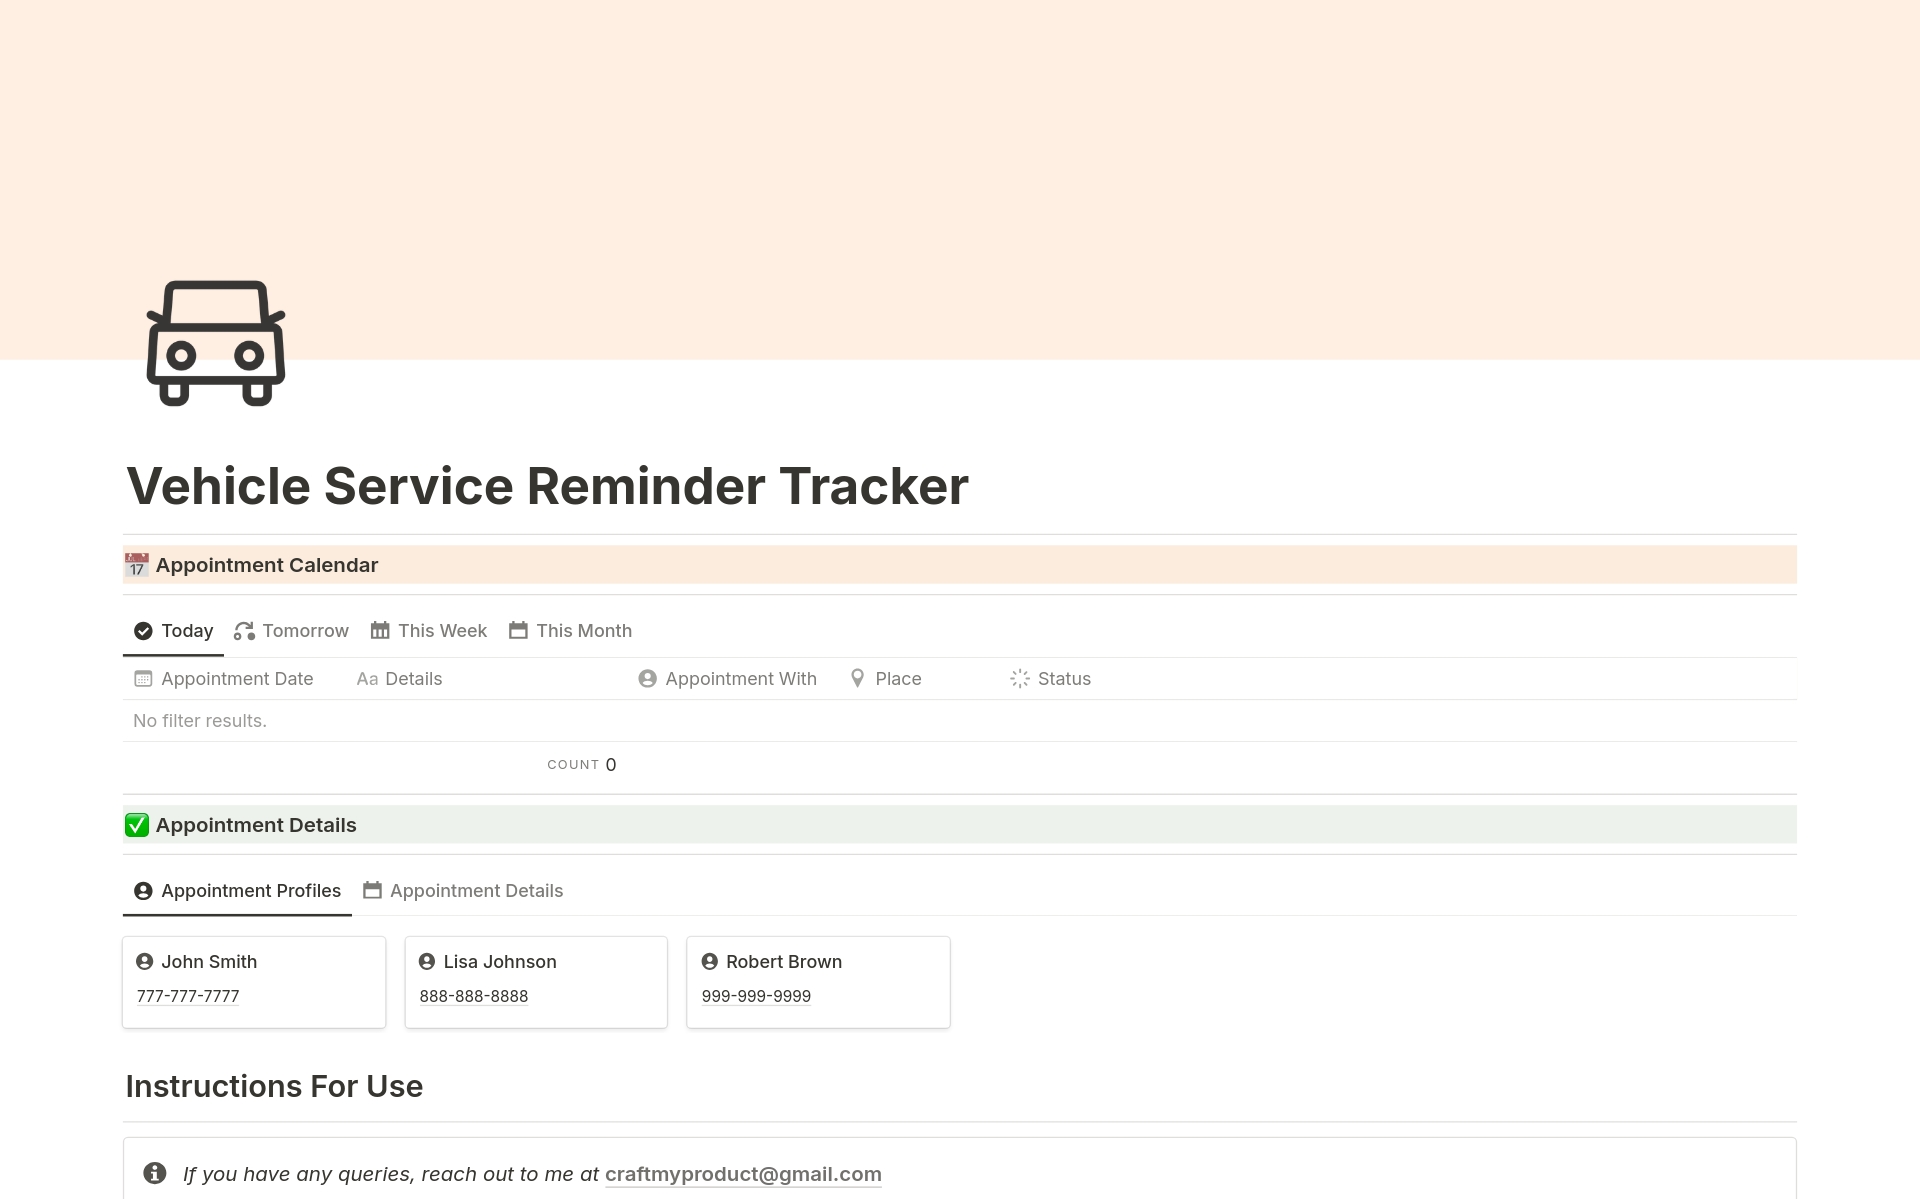 This vehicle service reminder tracker template is a well organized tool for people to track their vehicle service reminder details, add reminder due dates, enter appointment details information and much more.